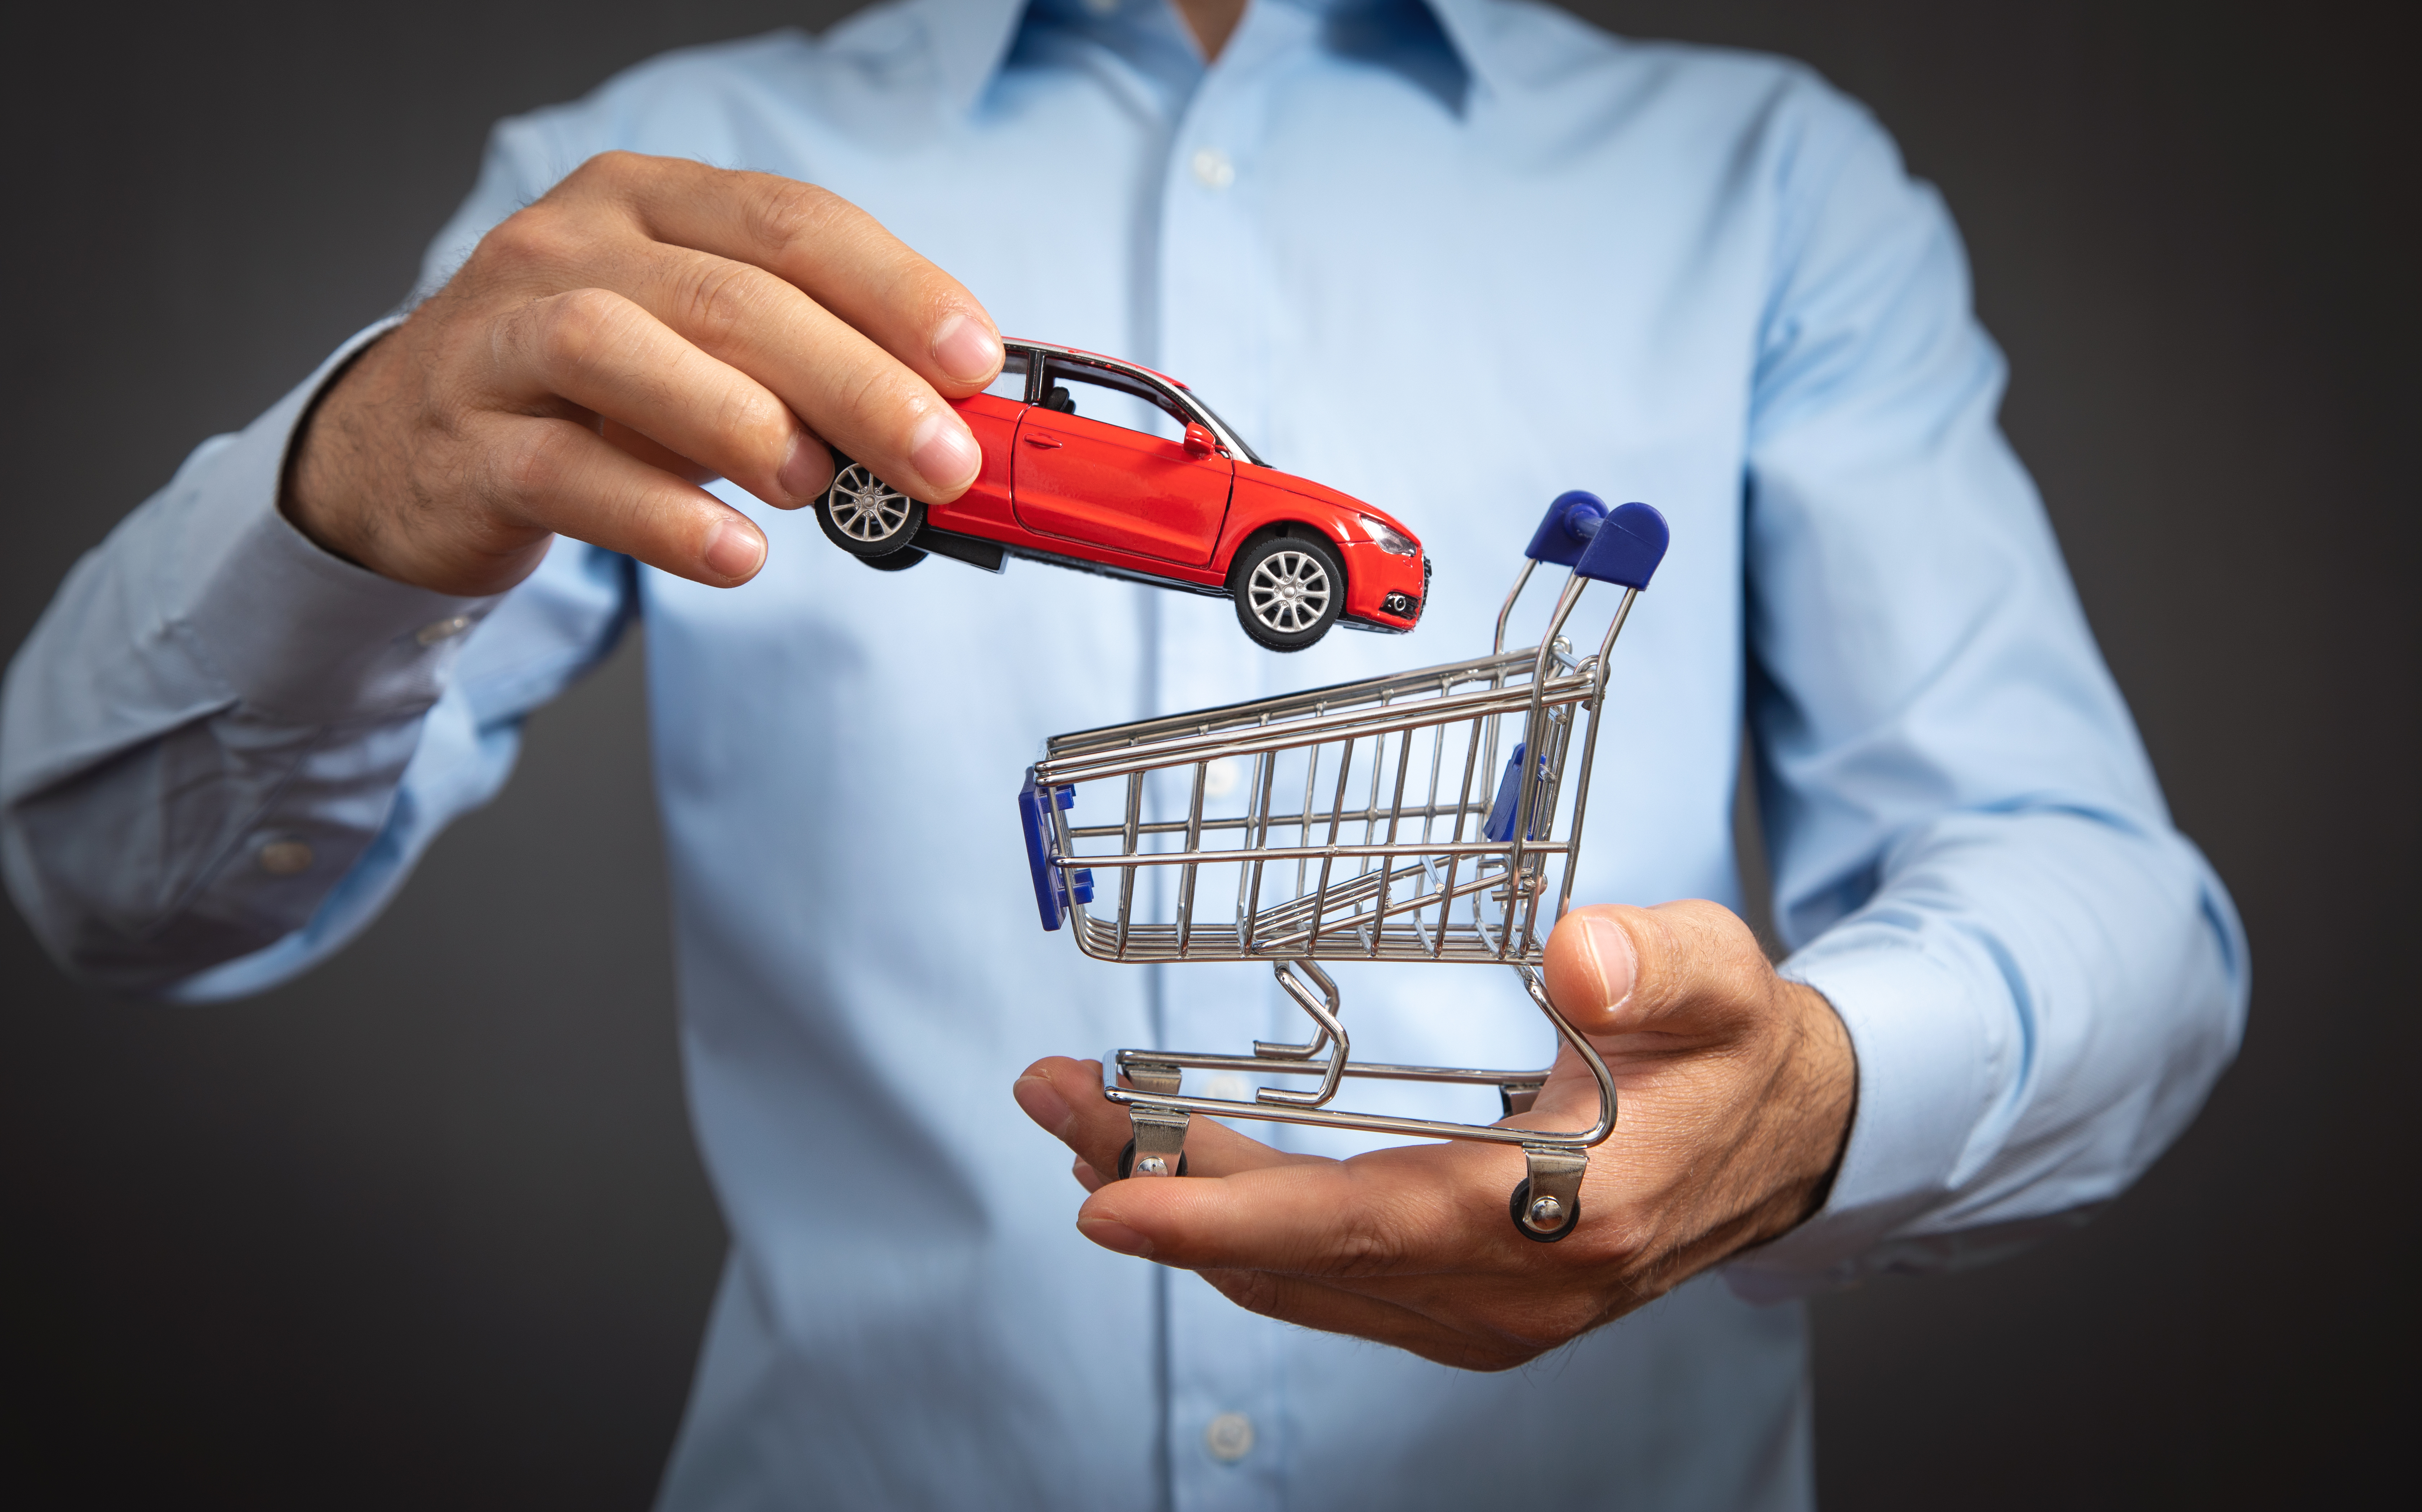 Businessman holding shopping cart and red toy car model.